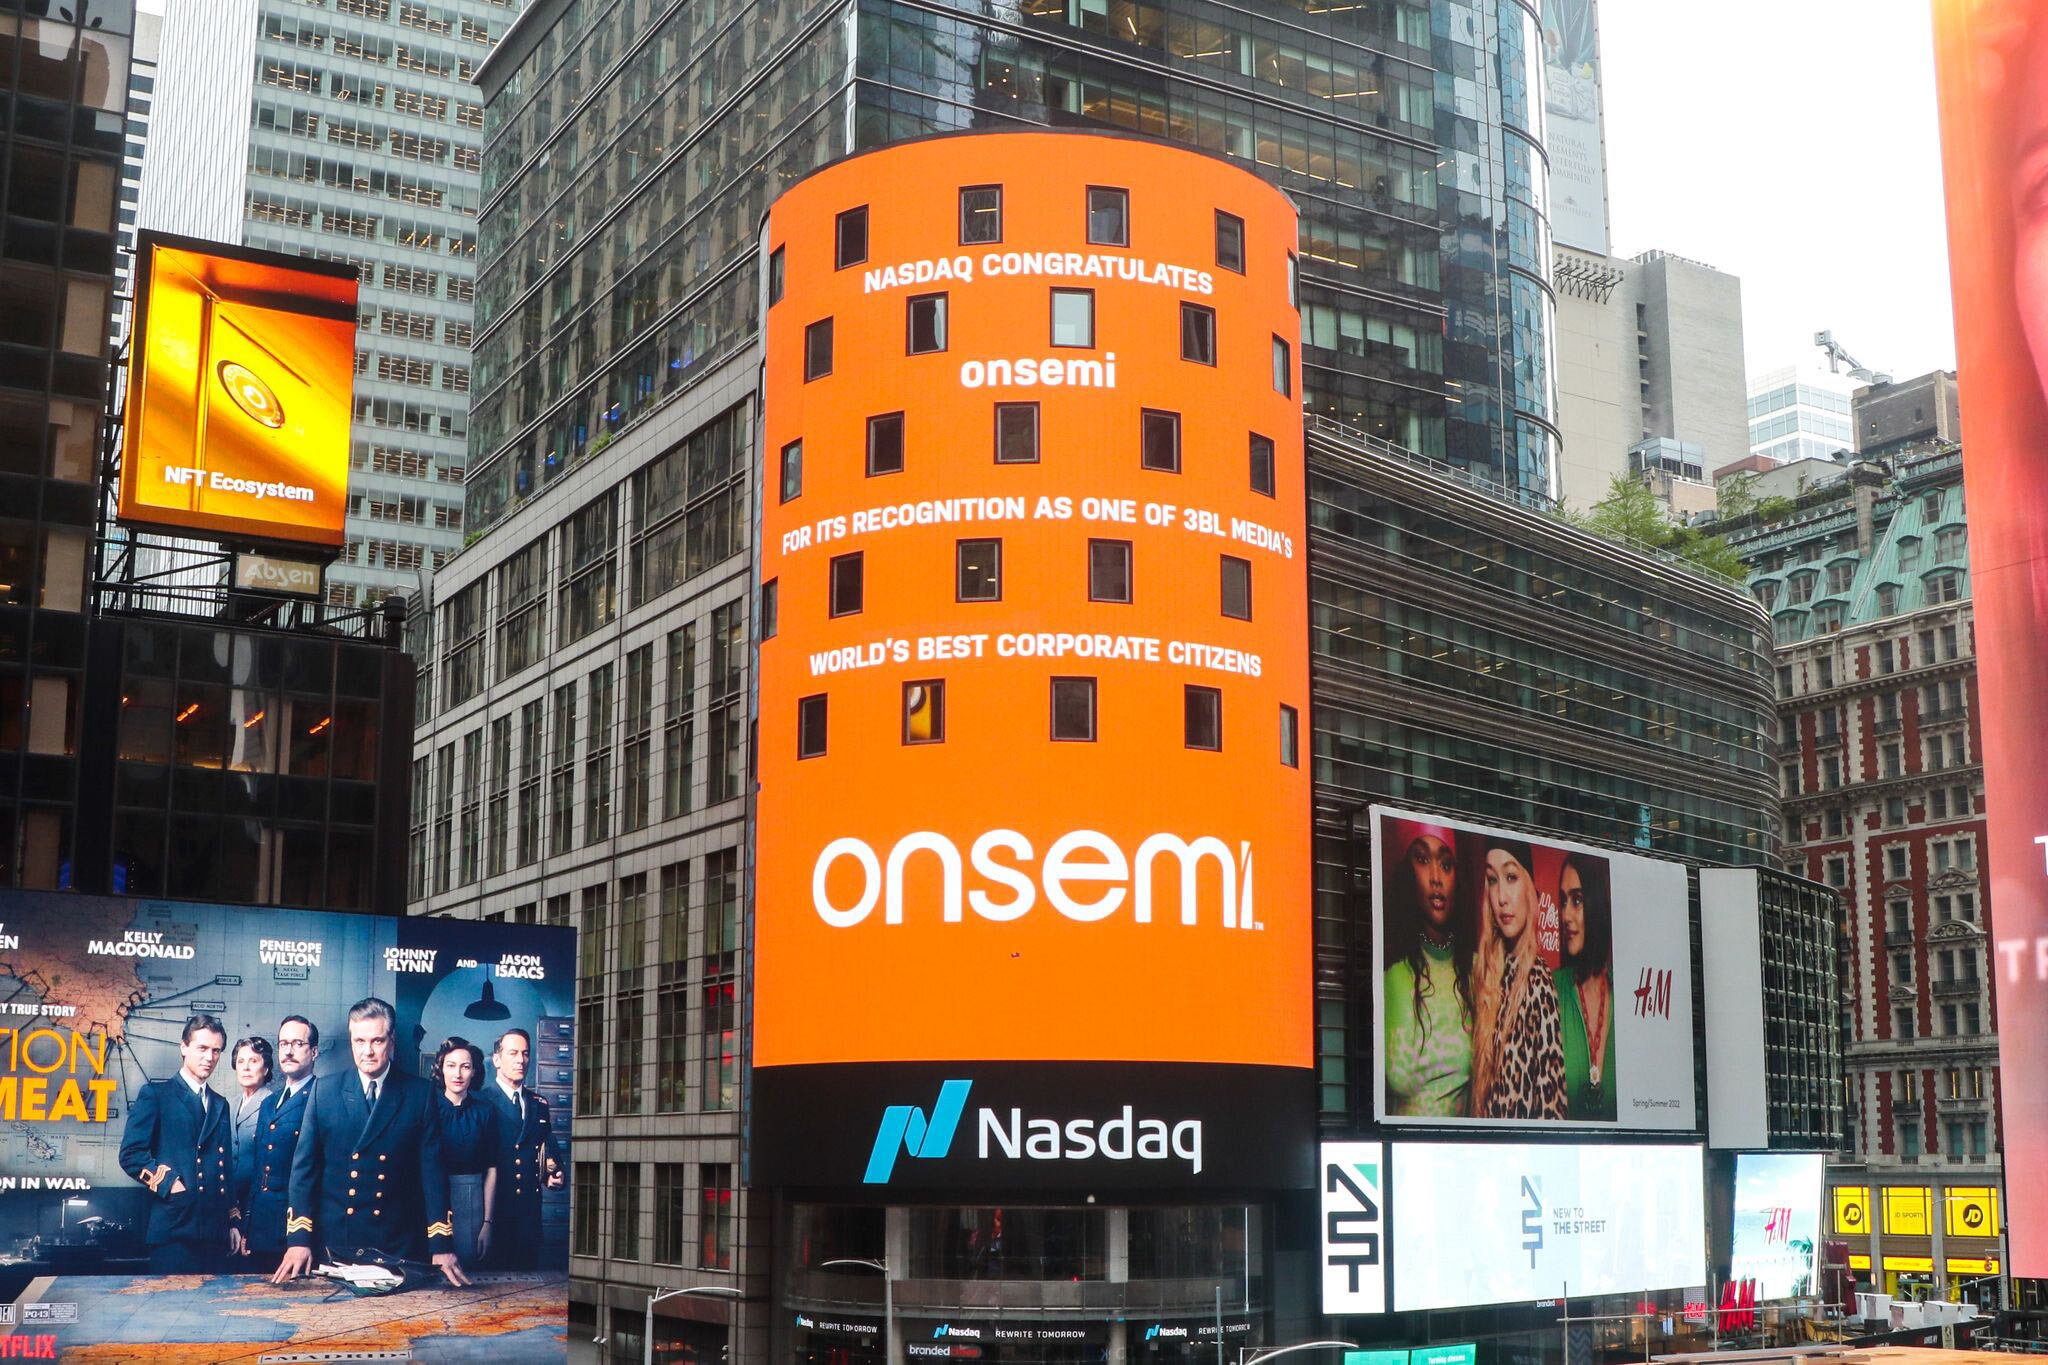 Our 3BL Media recognition was featured on the Nasdaq MarketSite in Times Square, New York, on Monday, May 23, courtesy of our friends at Nasdaq OneReport.